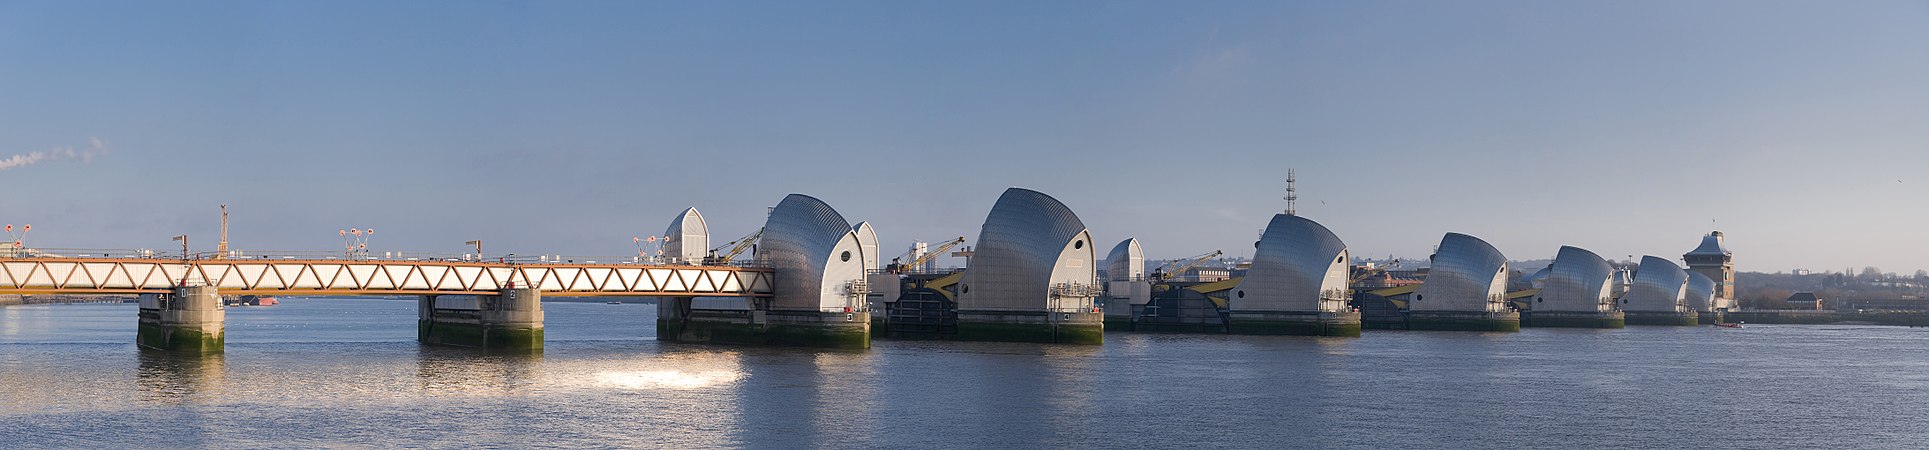 Thames Barrier, by David Iliff